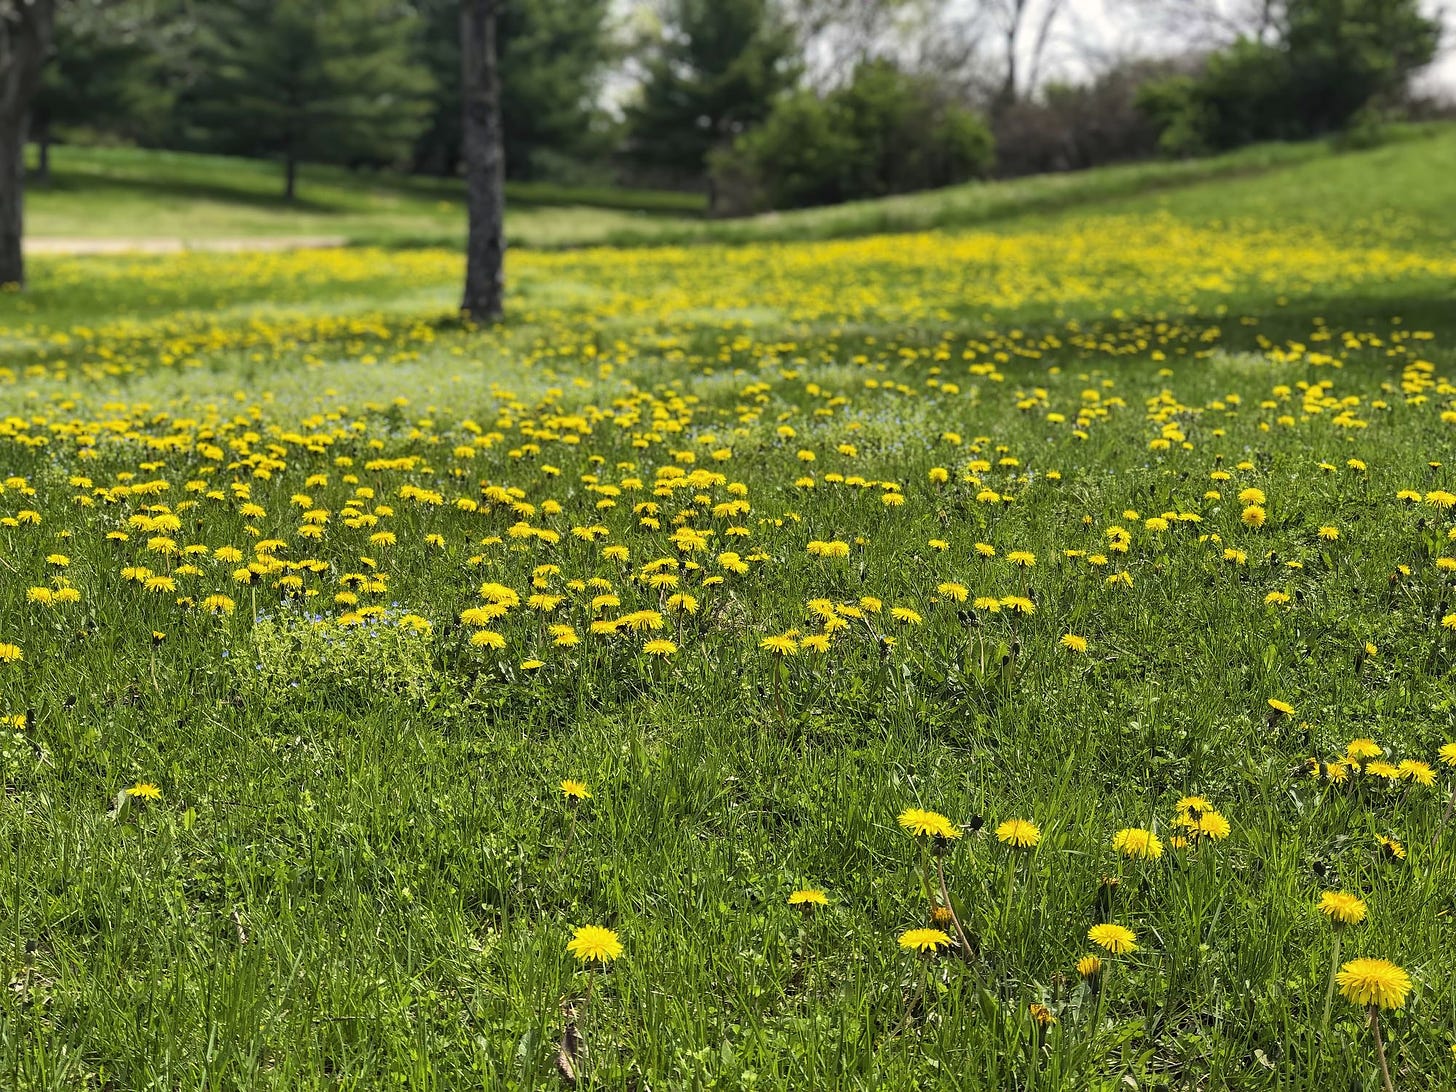 How to Get Rid of Crab Grass, Dandelions, and Other Lawn Pests